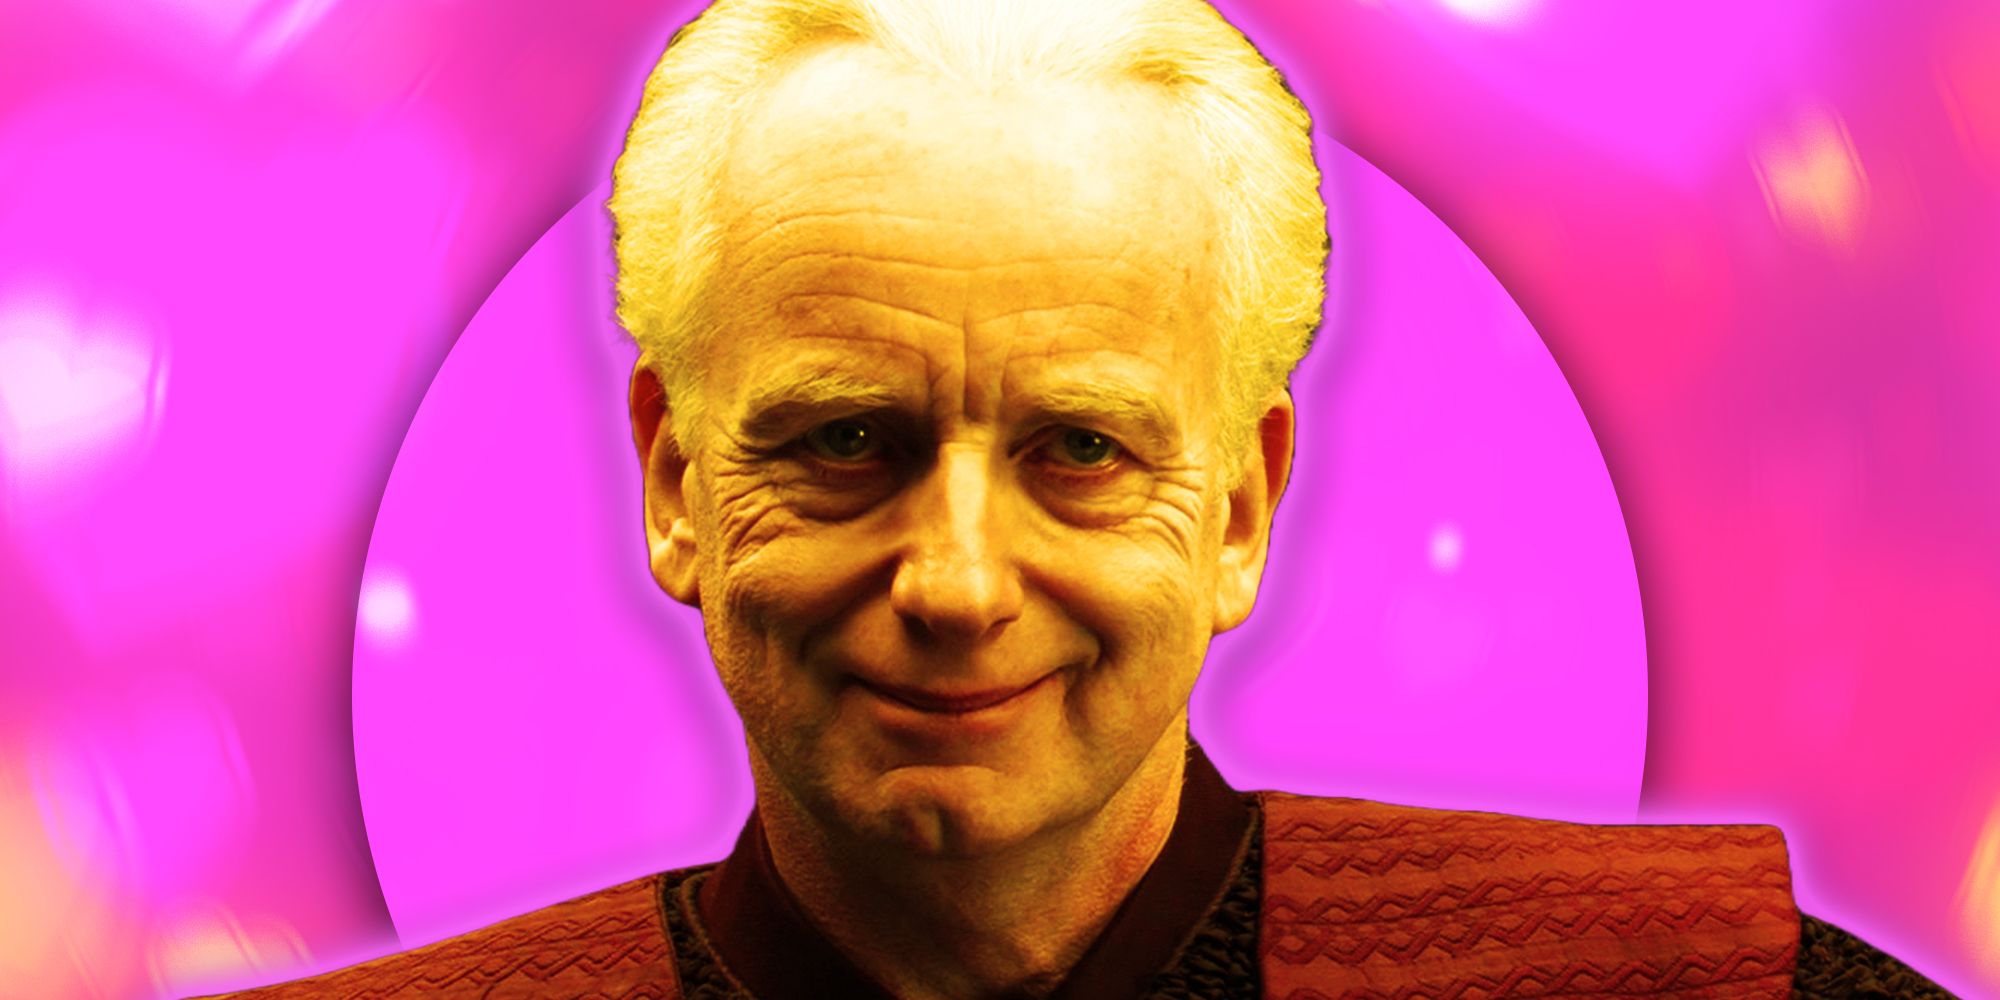 Ian McDiarmid as Emperor Sheev Palpatine smirking in Revenge of the Sith surrounded by pink and hearts